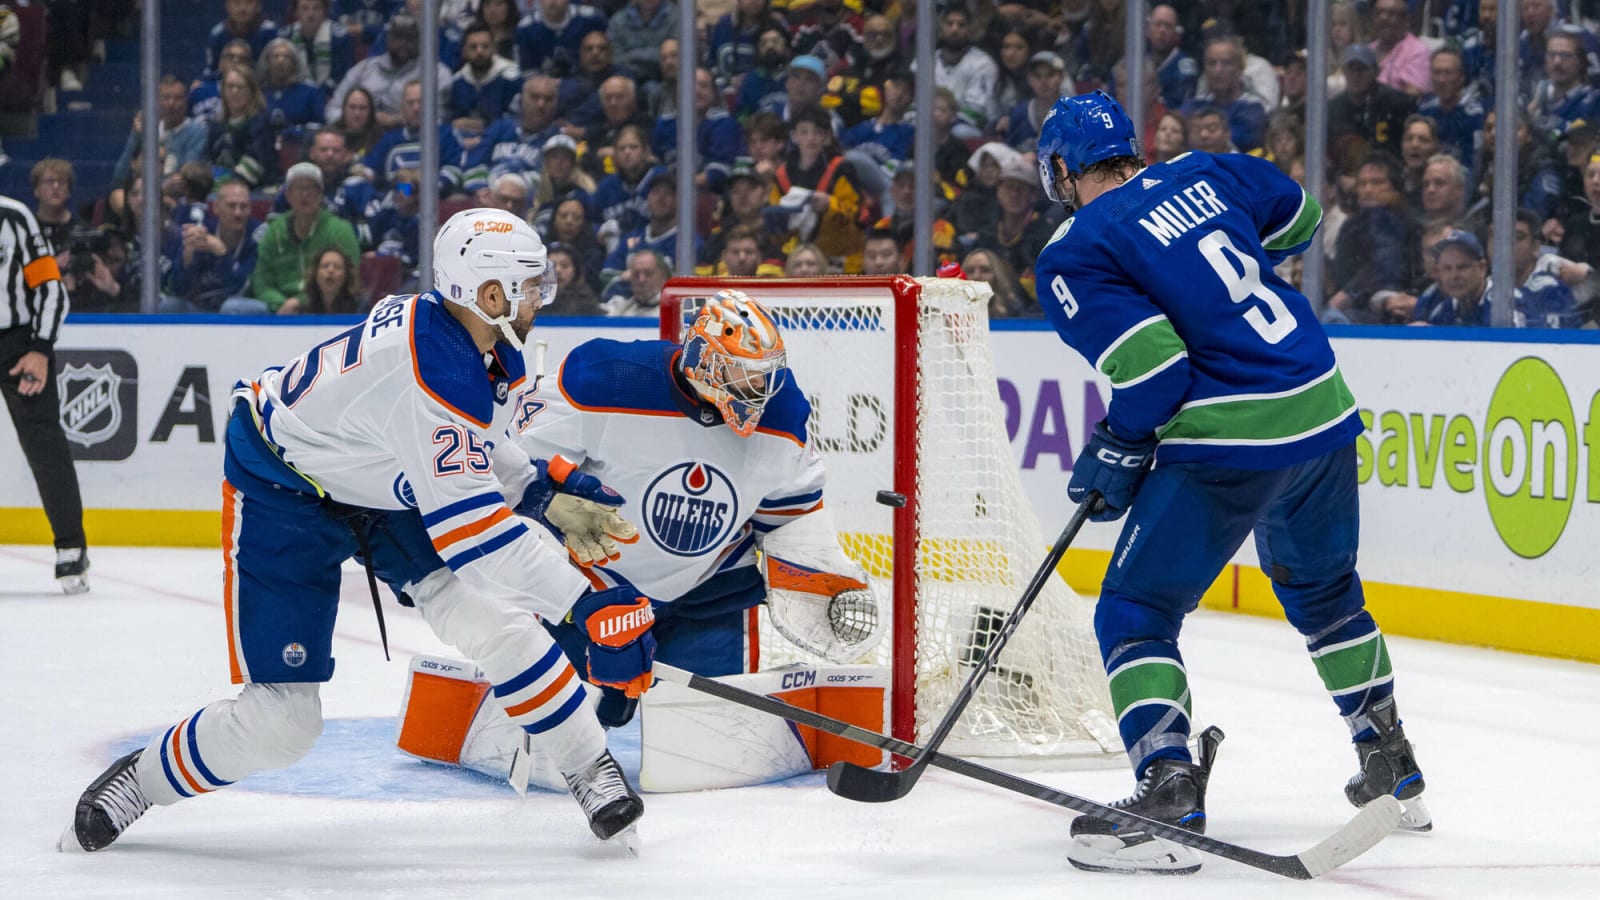 Beyond the Boxscore: Oilers three-goal lead evaporates against resilient Canucks